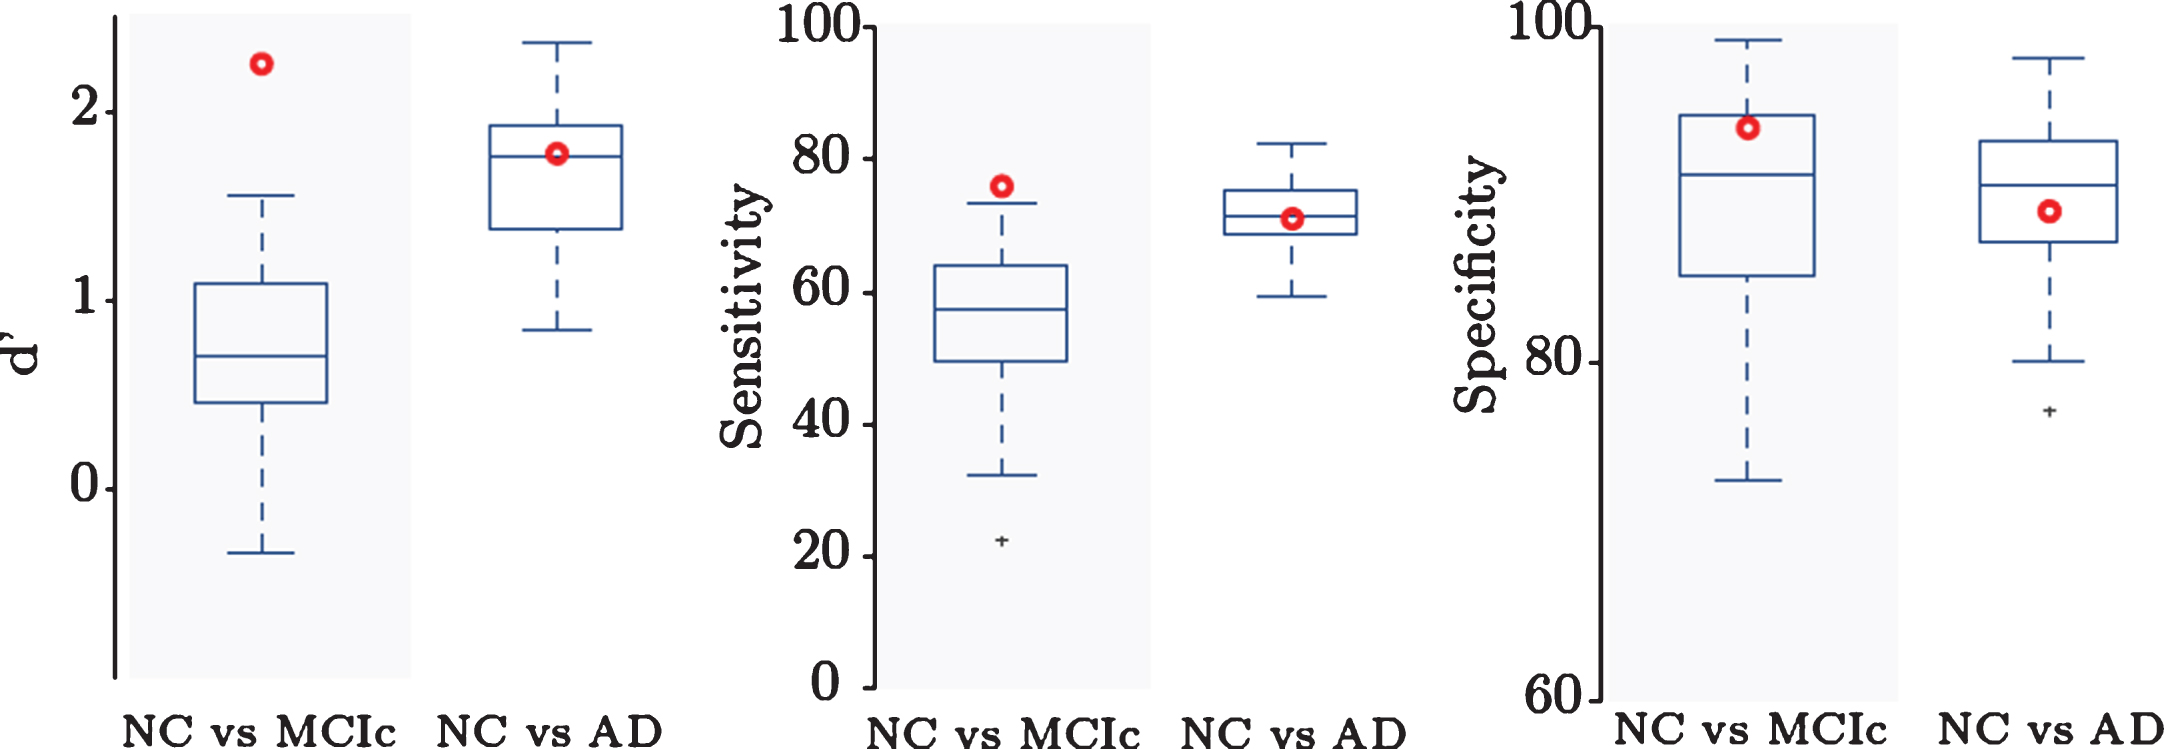 Comparison to other methods. D’, 
sensitivity, and specificity for NC versus AD and NC versus MCIc classification. Our method (red dot) outperforms 
previous methods in NC versus MCIc classification, indicating applicability for identifying patients with higher 
risk of conversion to 
AD.